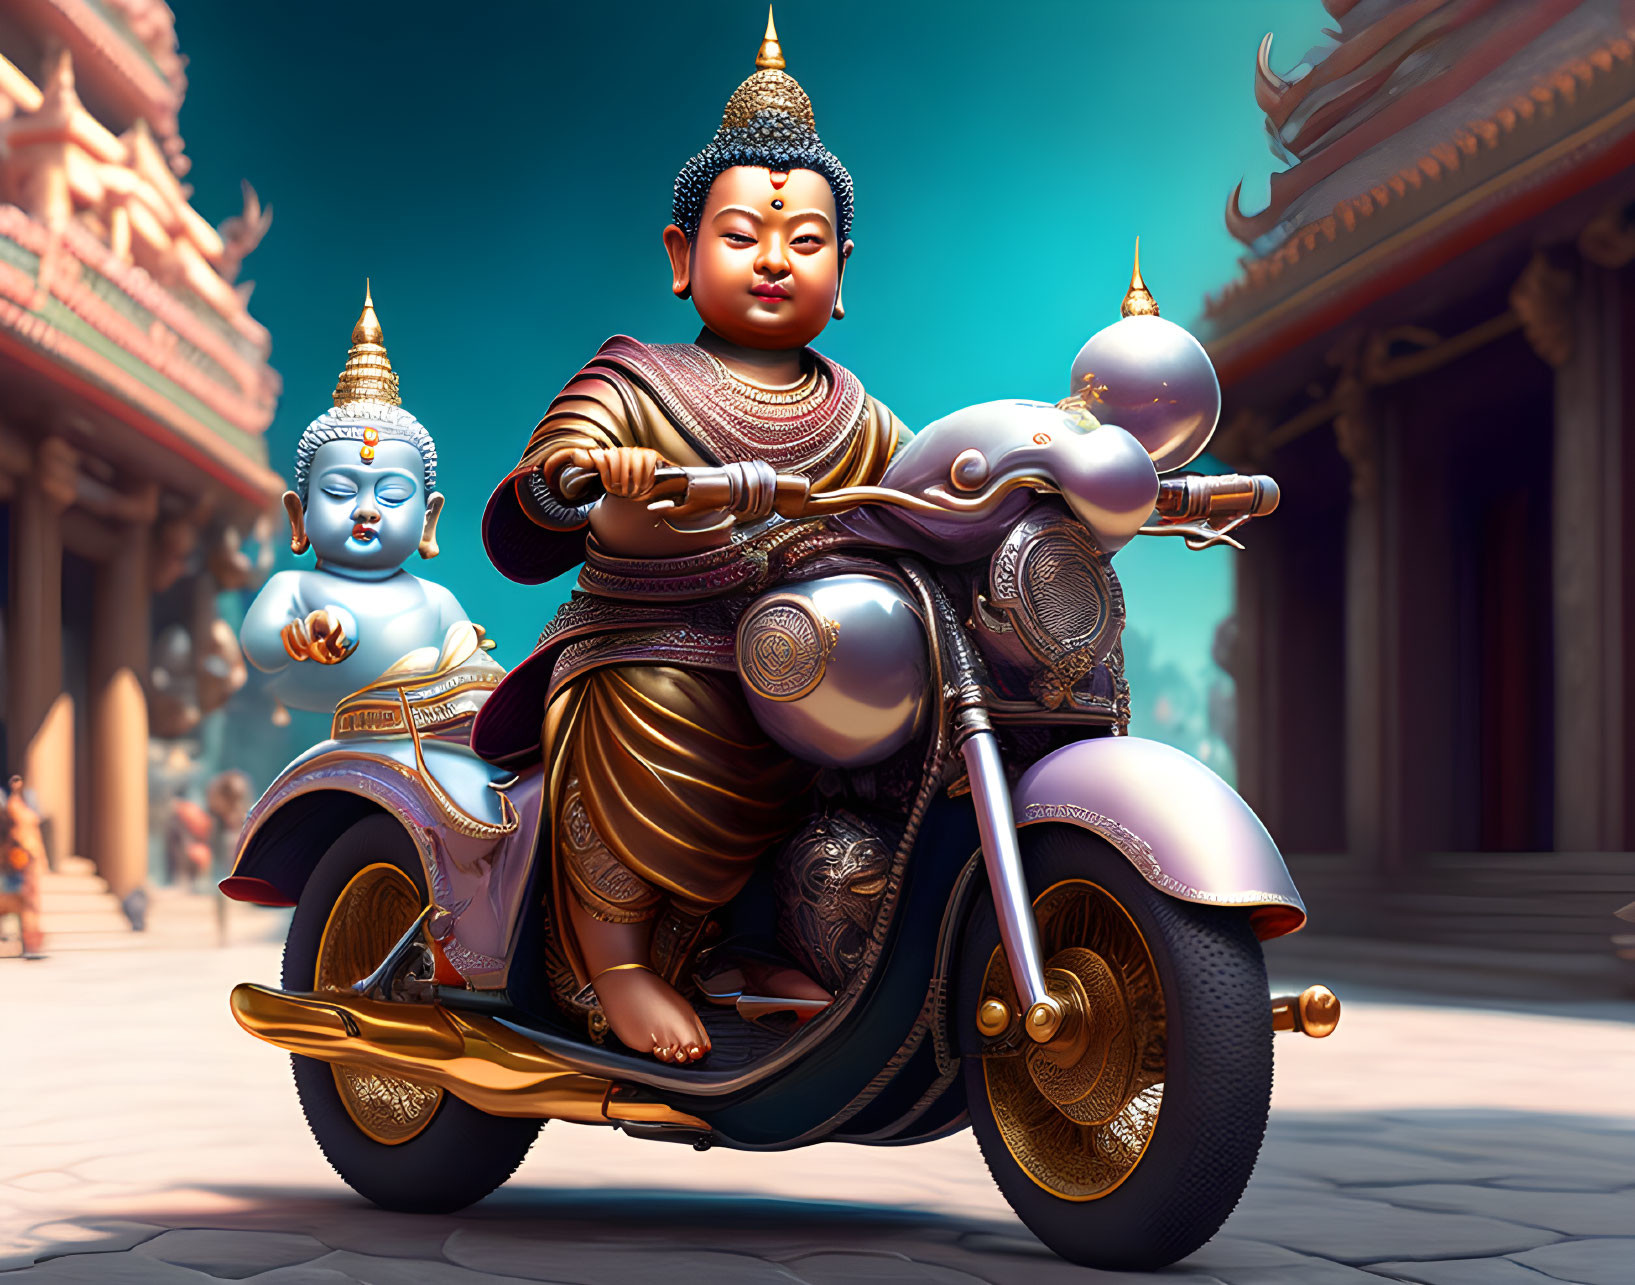 Cartoon Buddha figures on purple and gold scooter in Asian setting